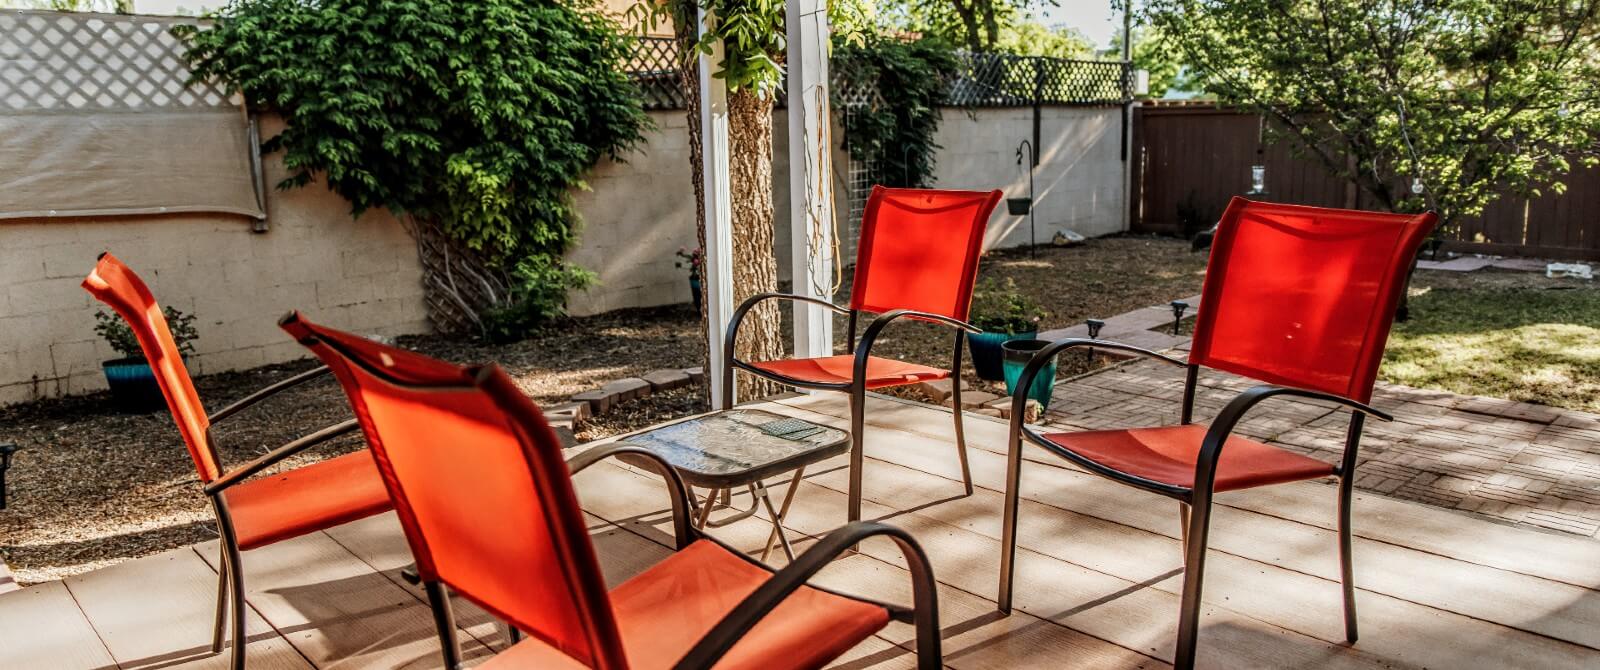 An outdoor fenced patio with four red chairs and a small table